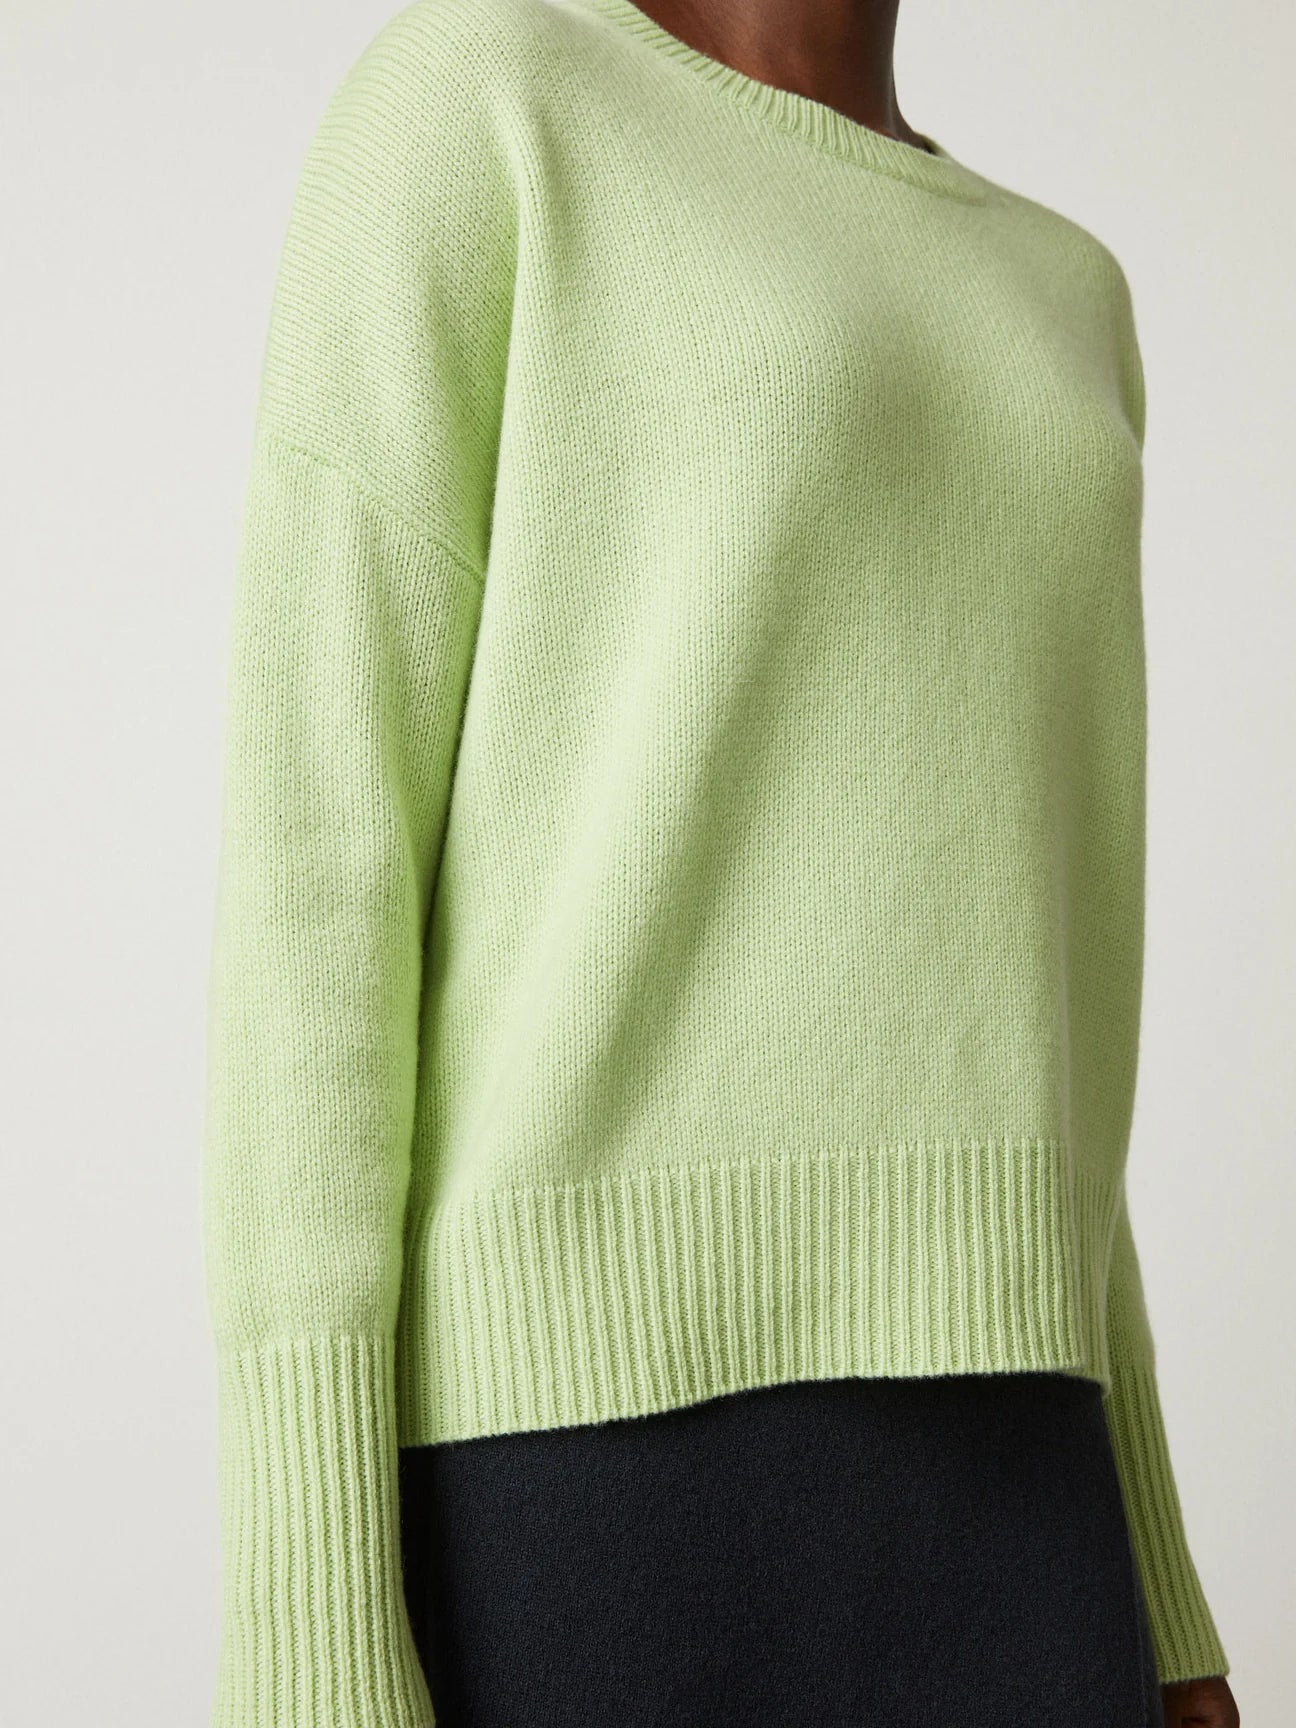 Mila Sweater, Mint, Pullover